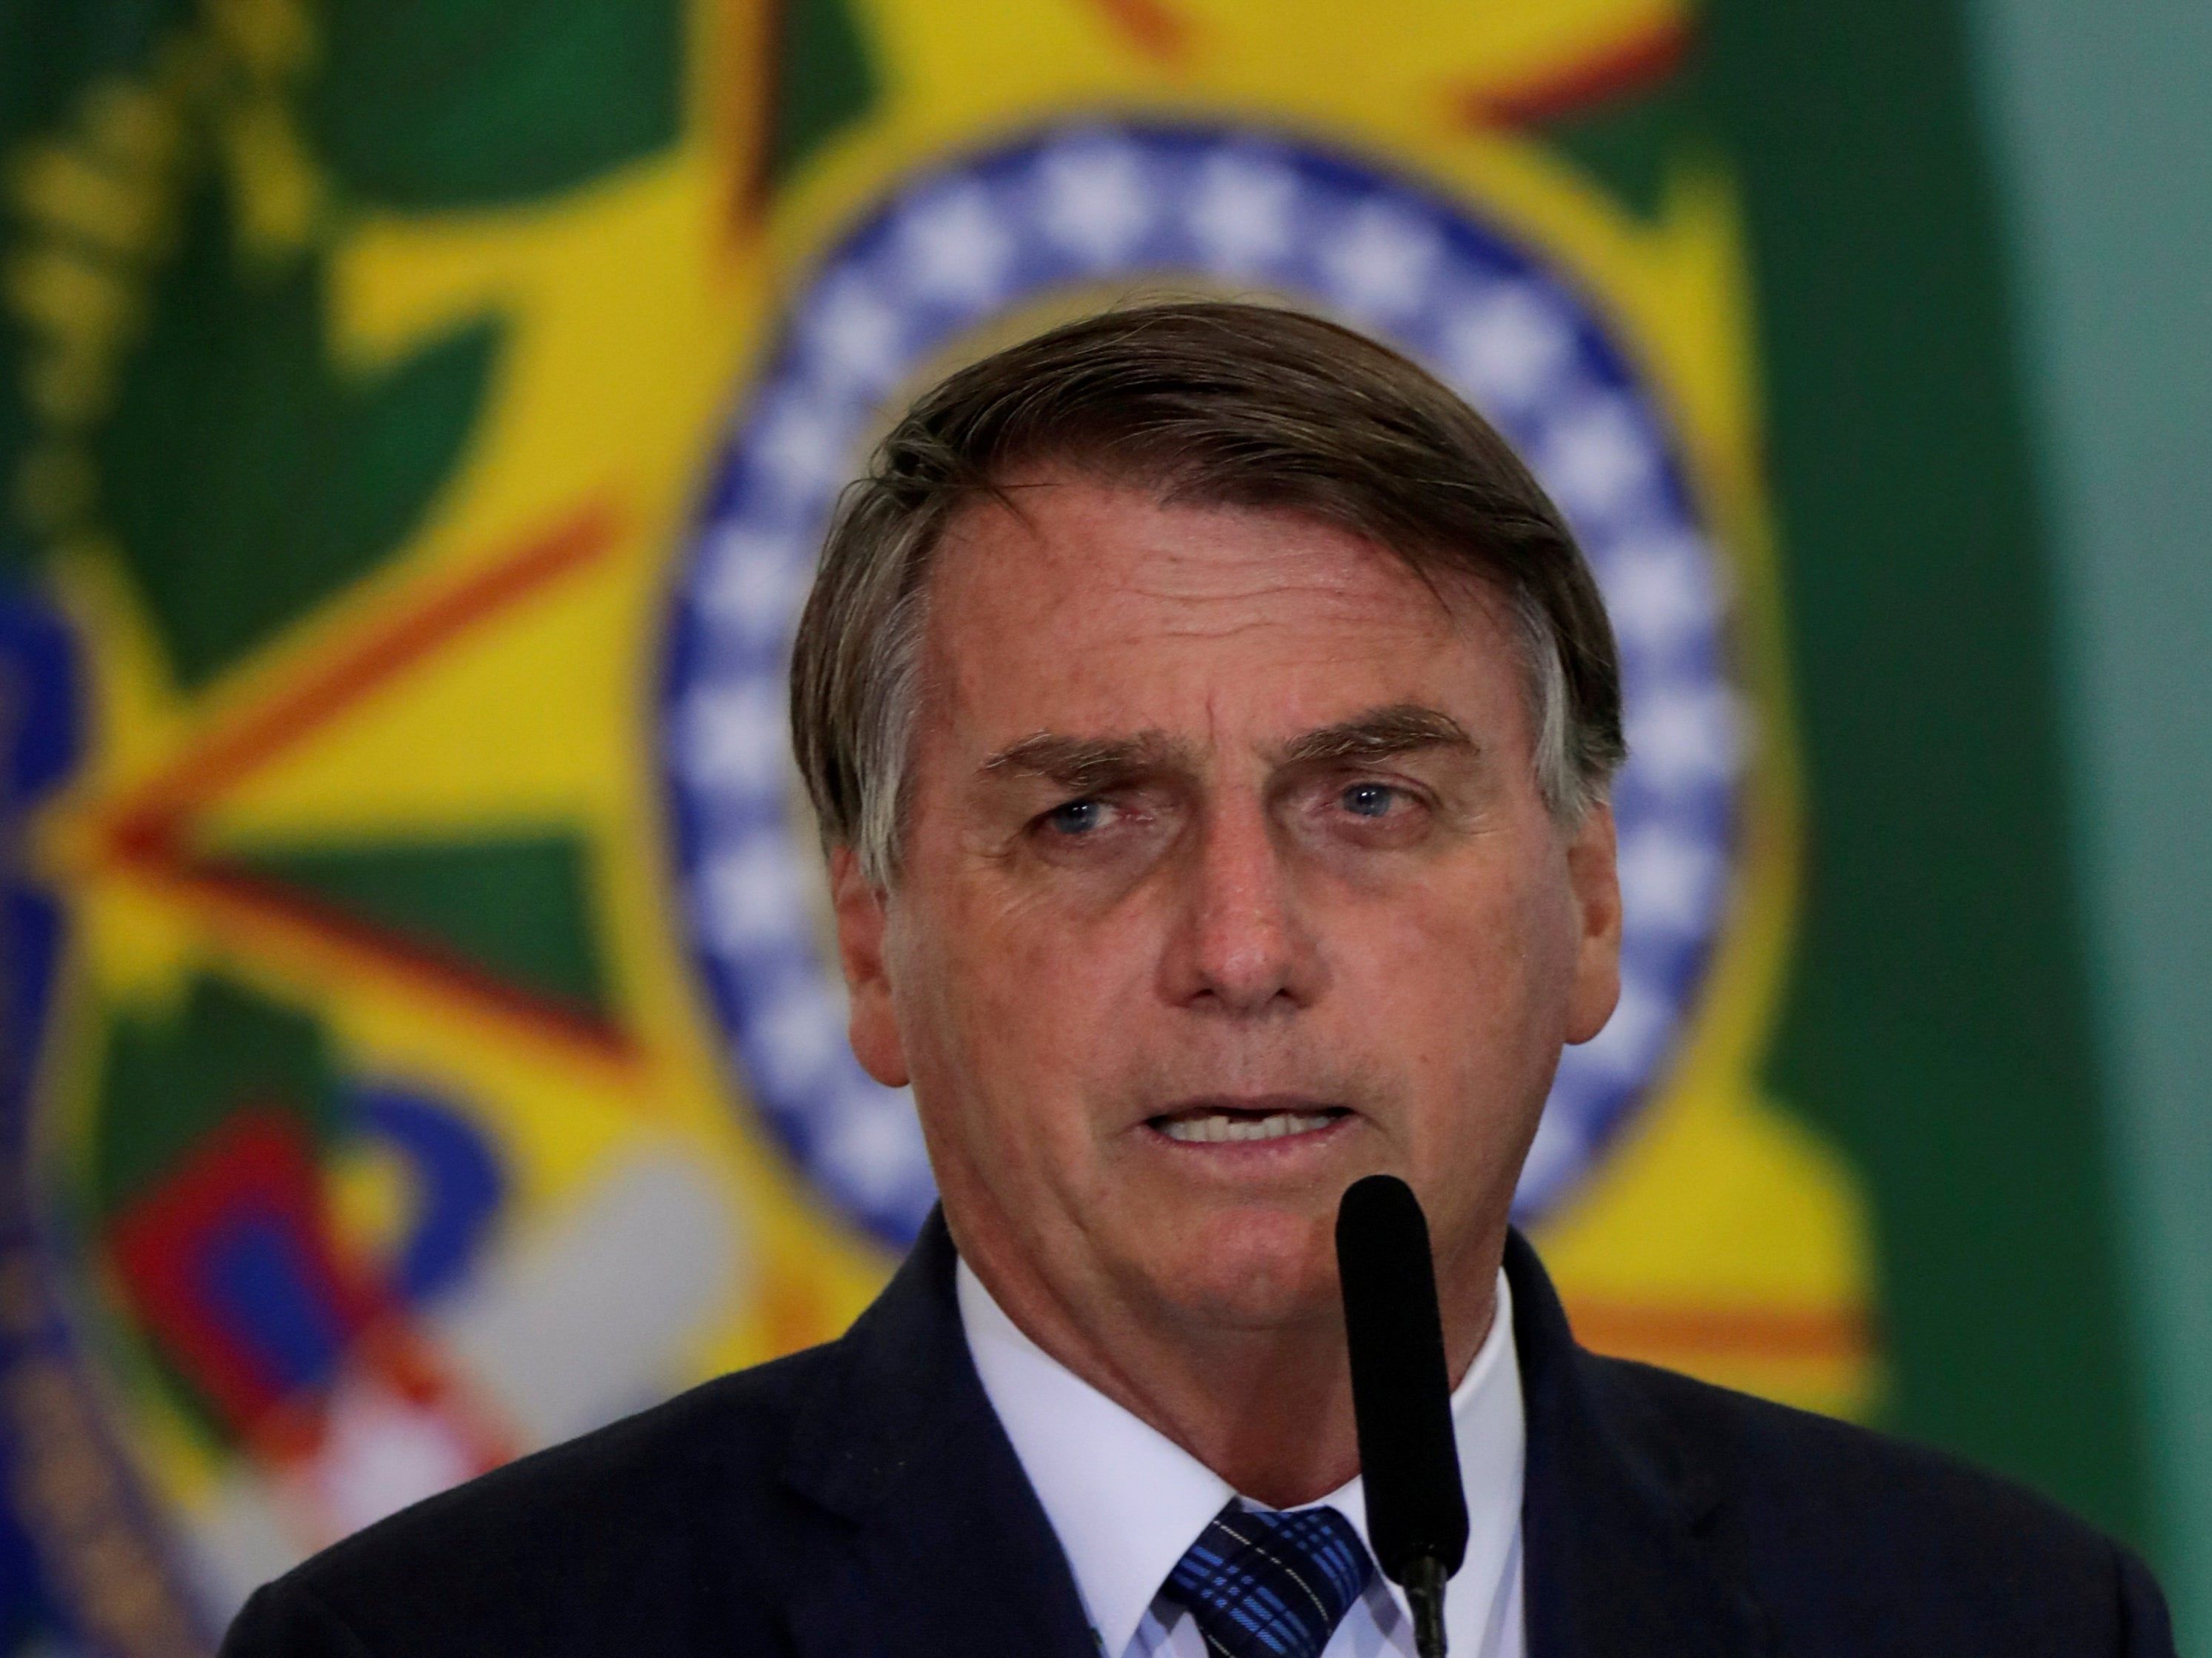 Last month, Mr Bolsonaro’s disapproval rating hit an all-time high